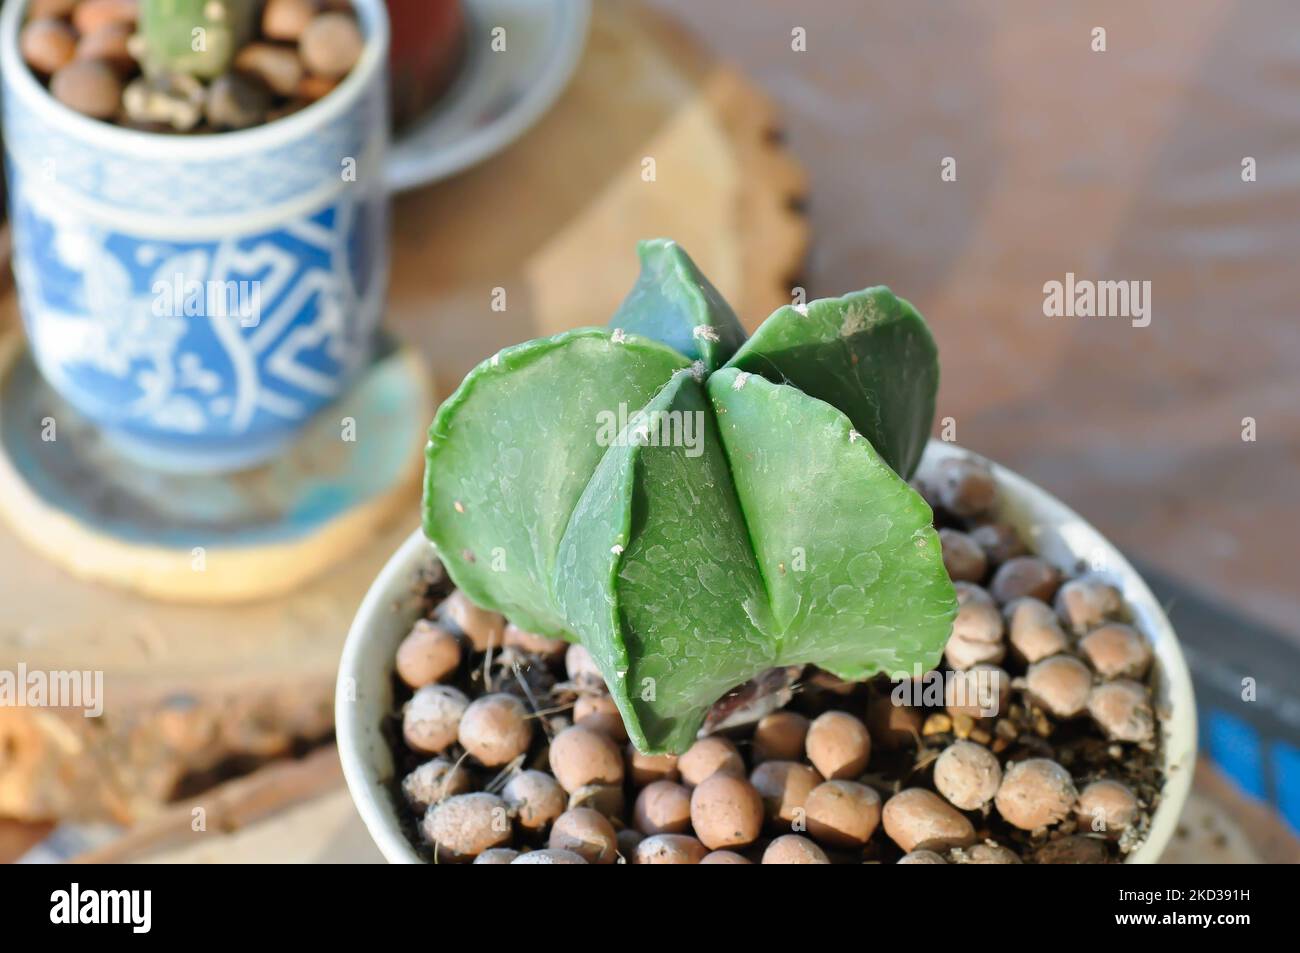 Astrophytum myriostigma, astrophytum myriostigma nudum or astrophytum myriostigma var nudum or cactus or succulent Stock Photo